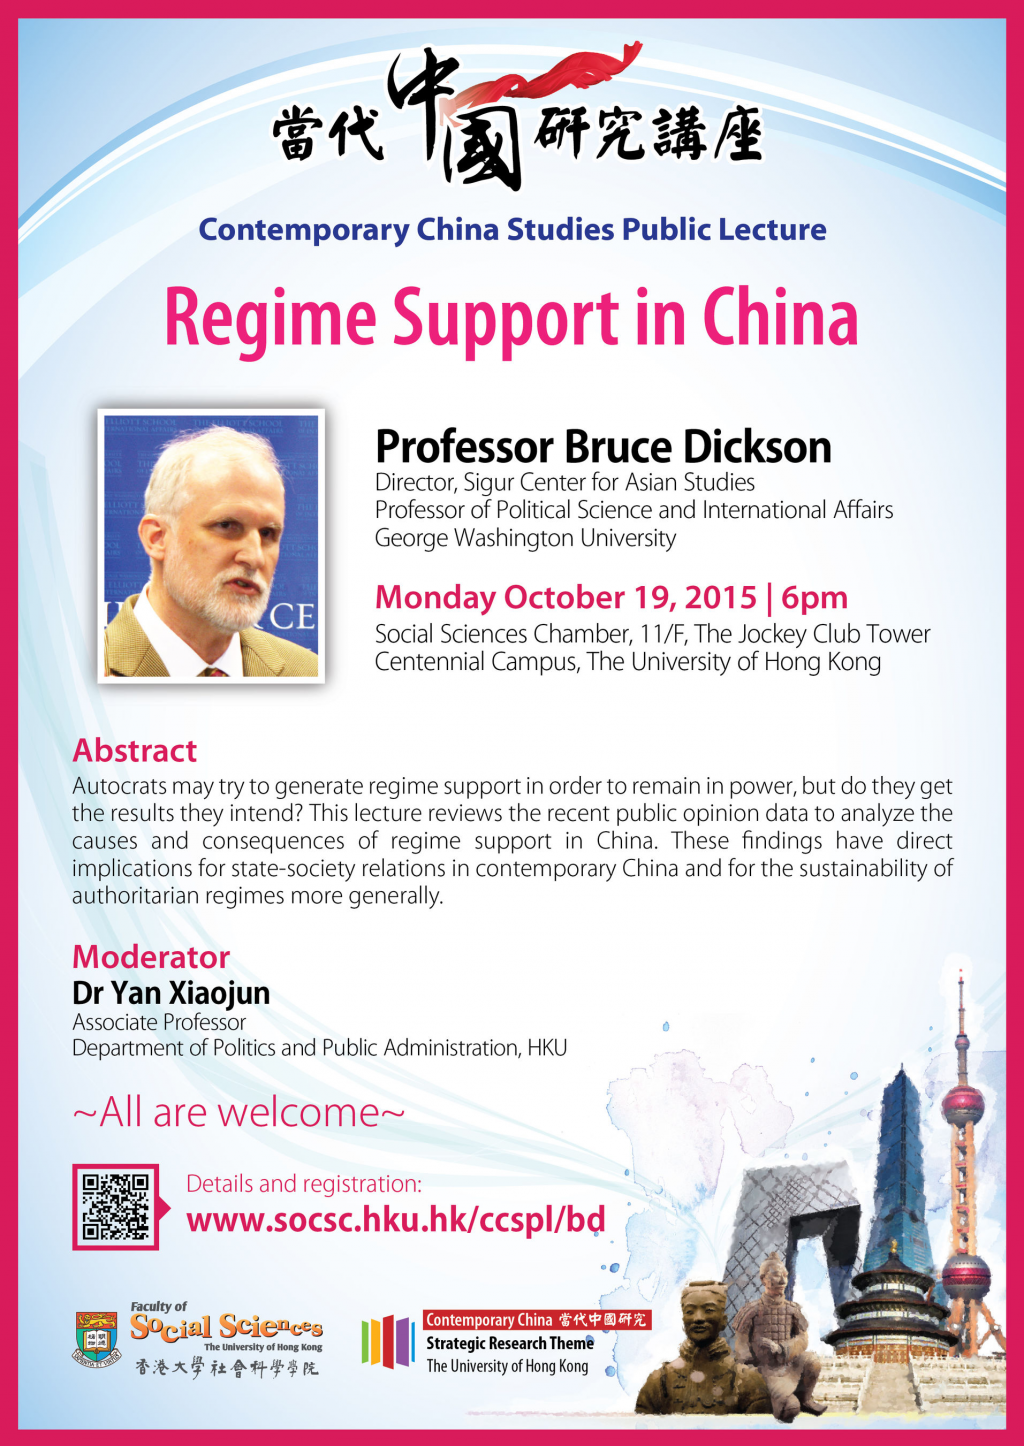 Contemporary China Studies Public Lecture Regime Support in China